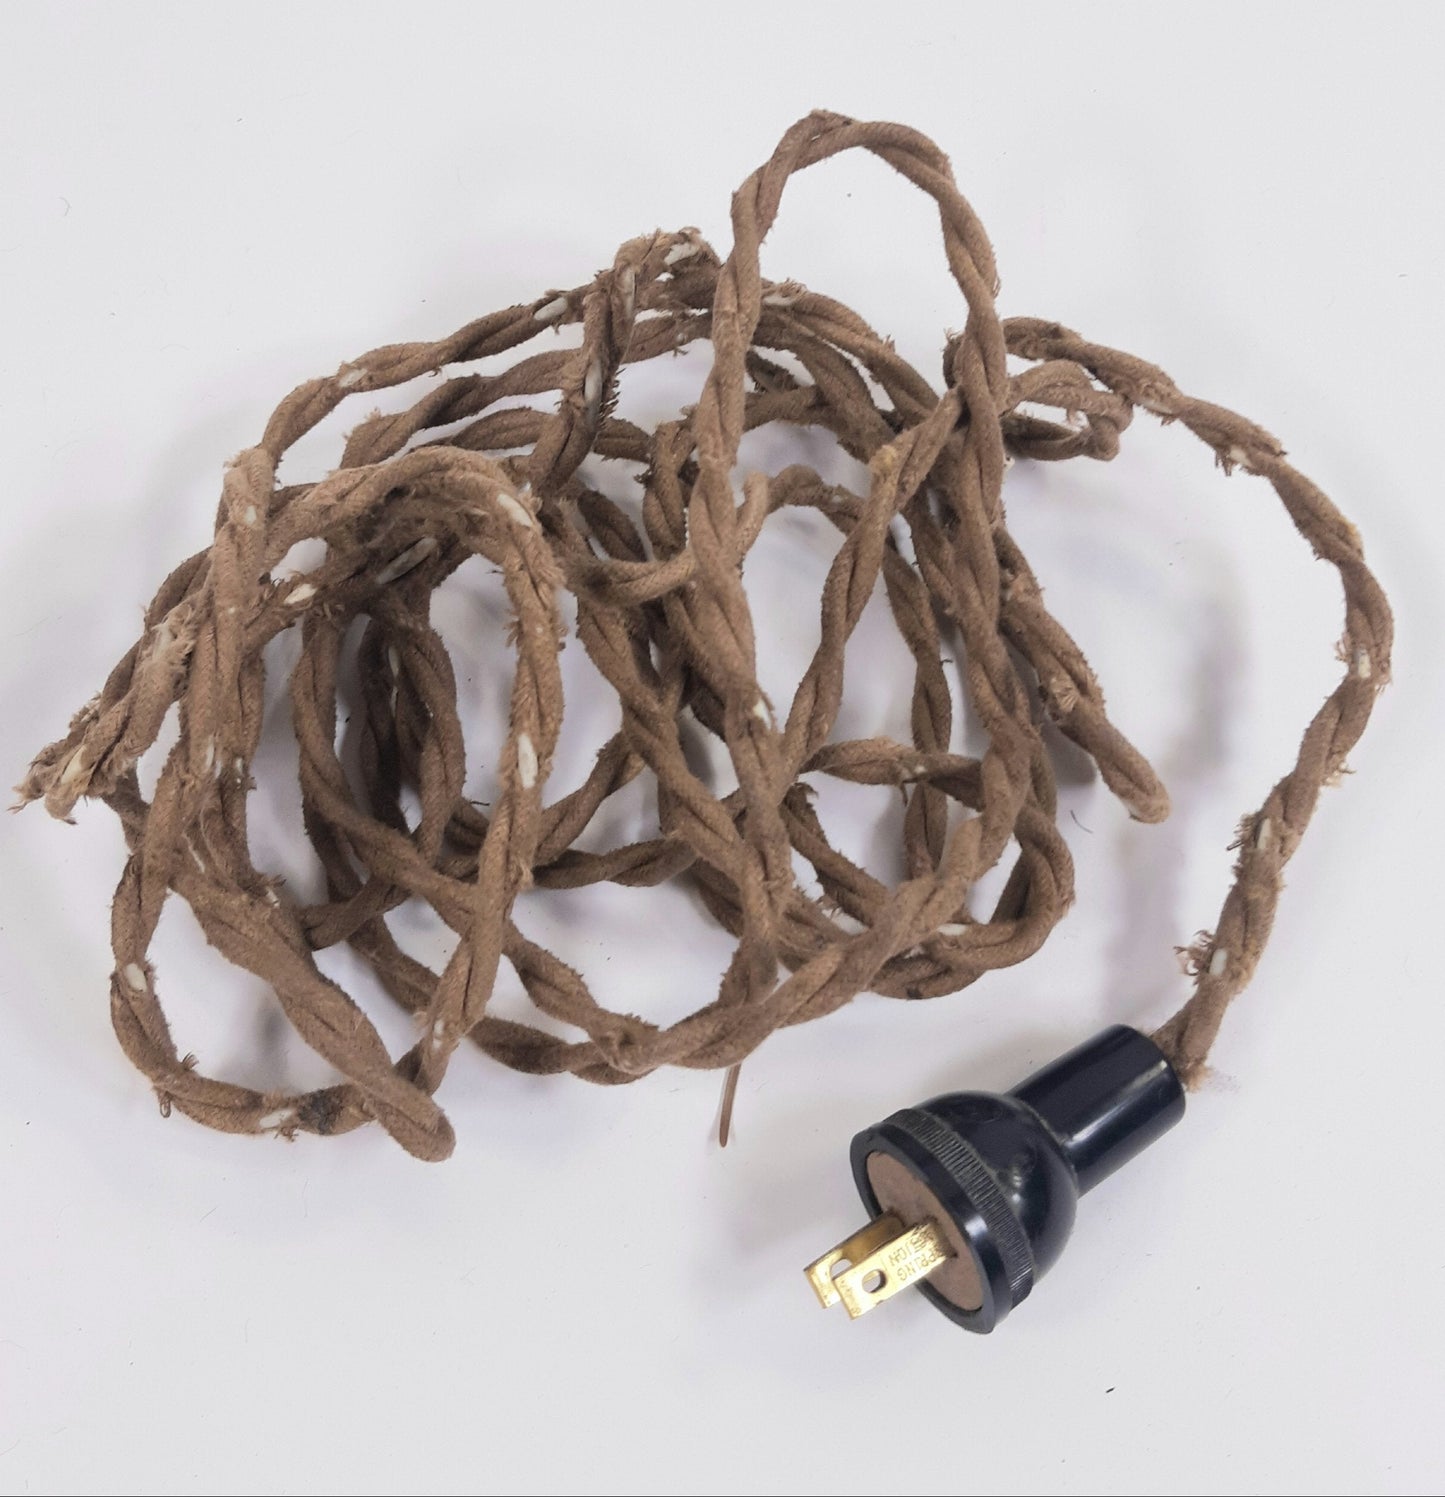 American Horror Story Asylum: Dr Arden's Prop Electrical Cord